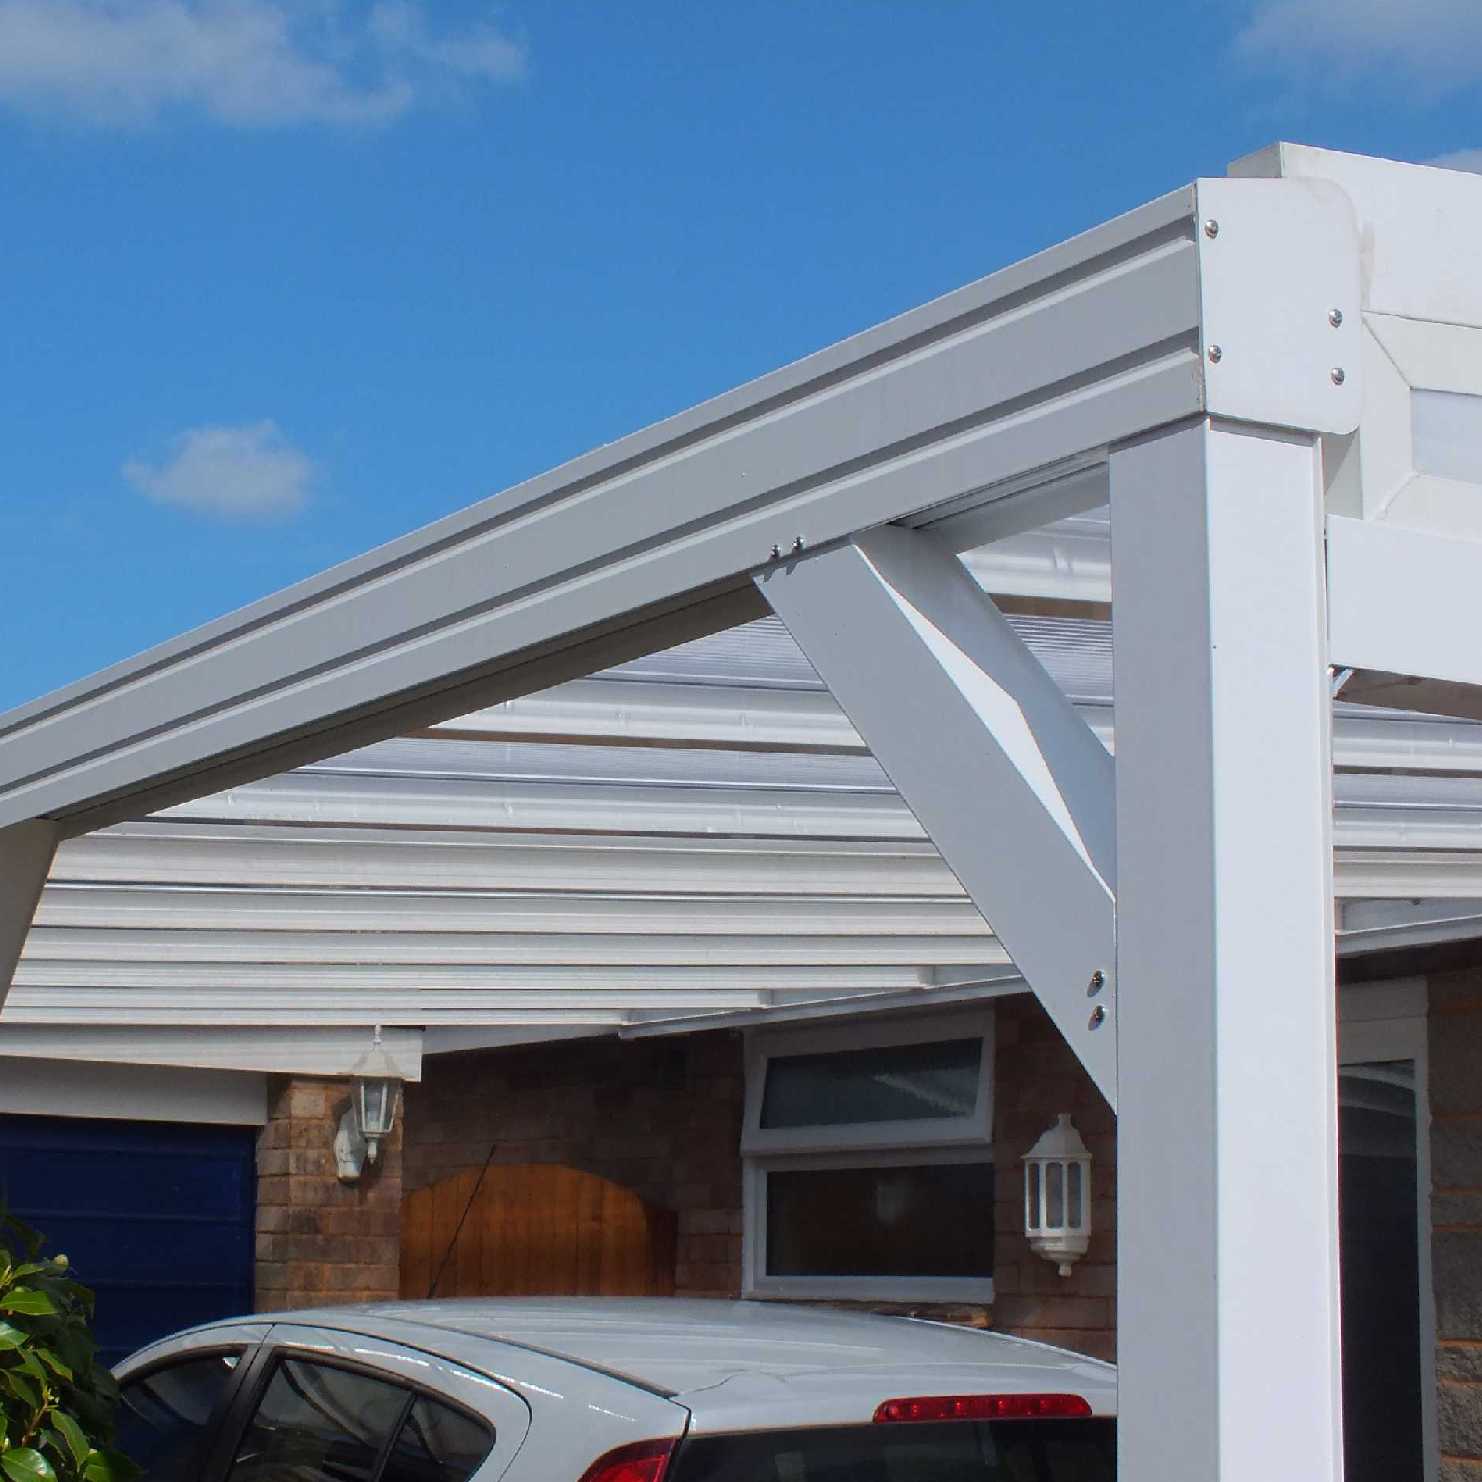 Great deals on Omega Smart Lean-To Canopy, White with 16mm Polycarbonate Glazing - 11.6m (W) x 1.5m (P), (5) Supporting Posts